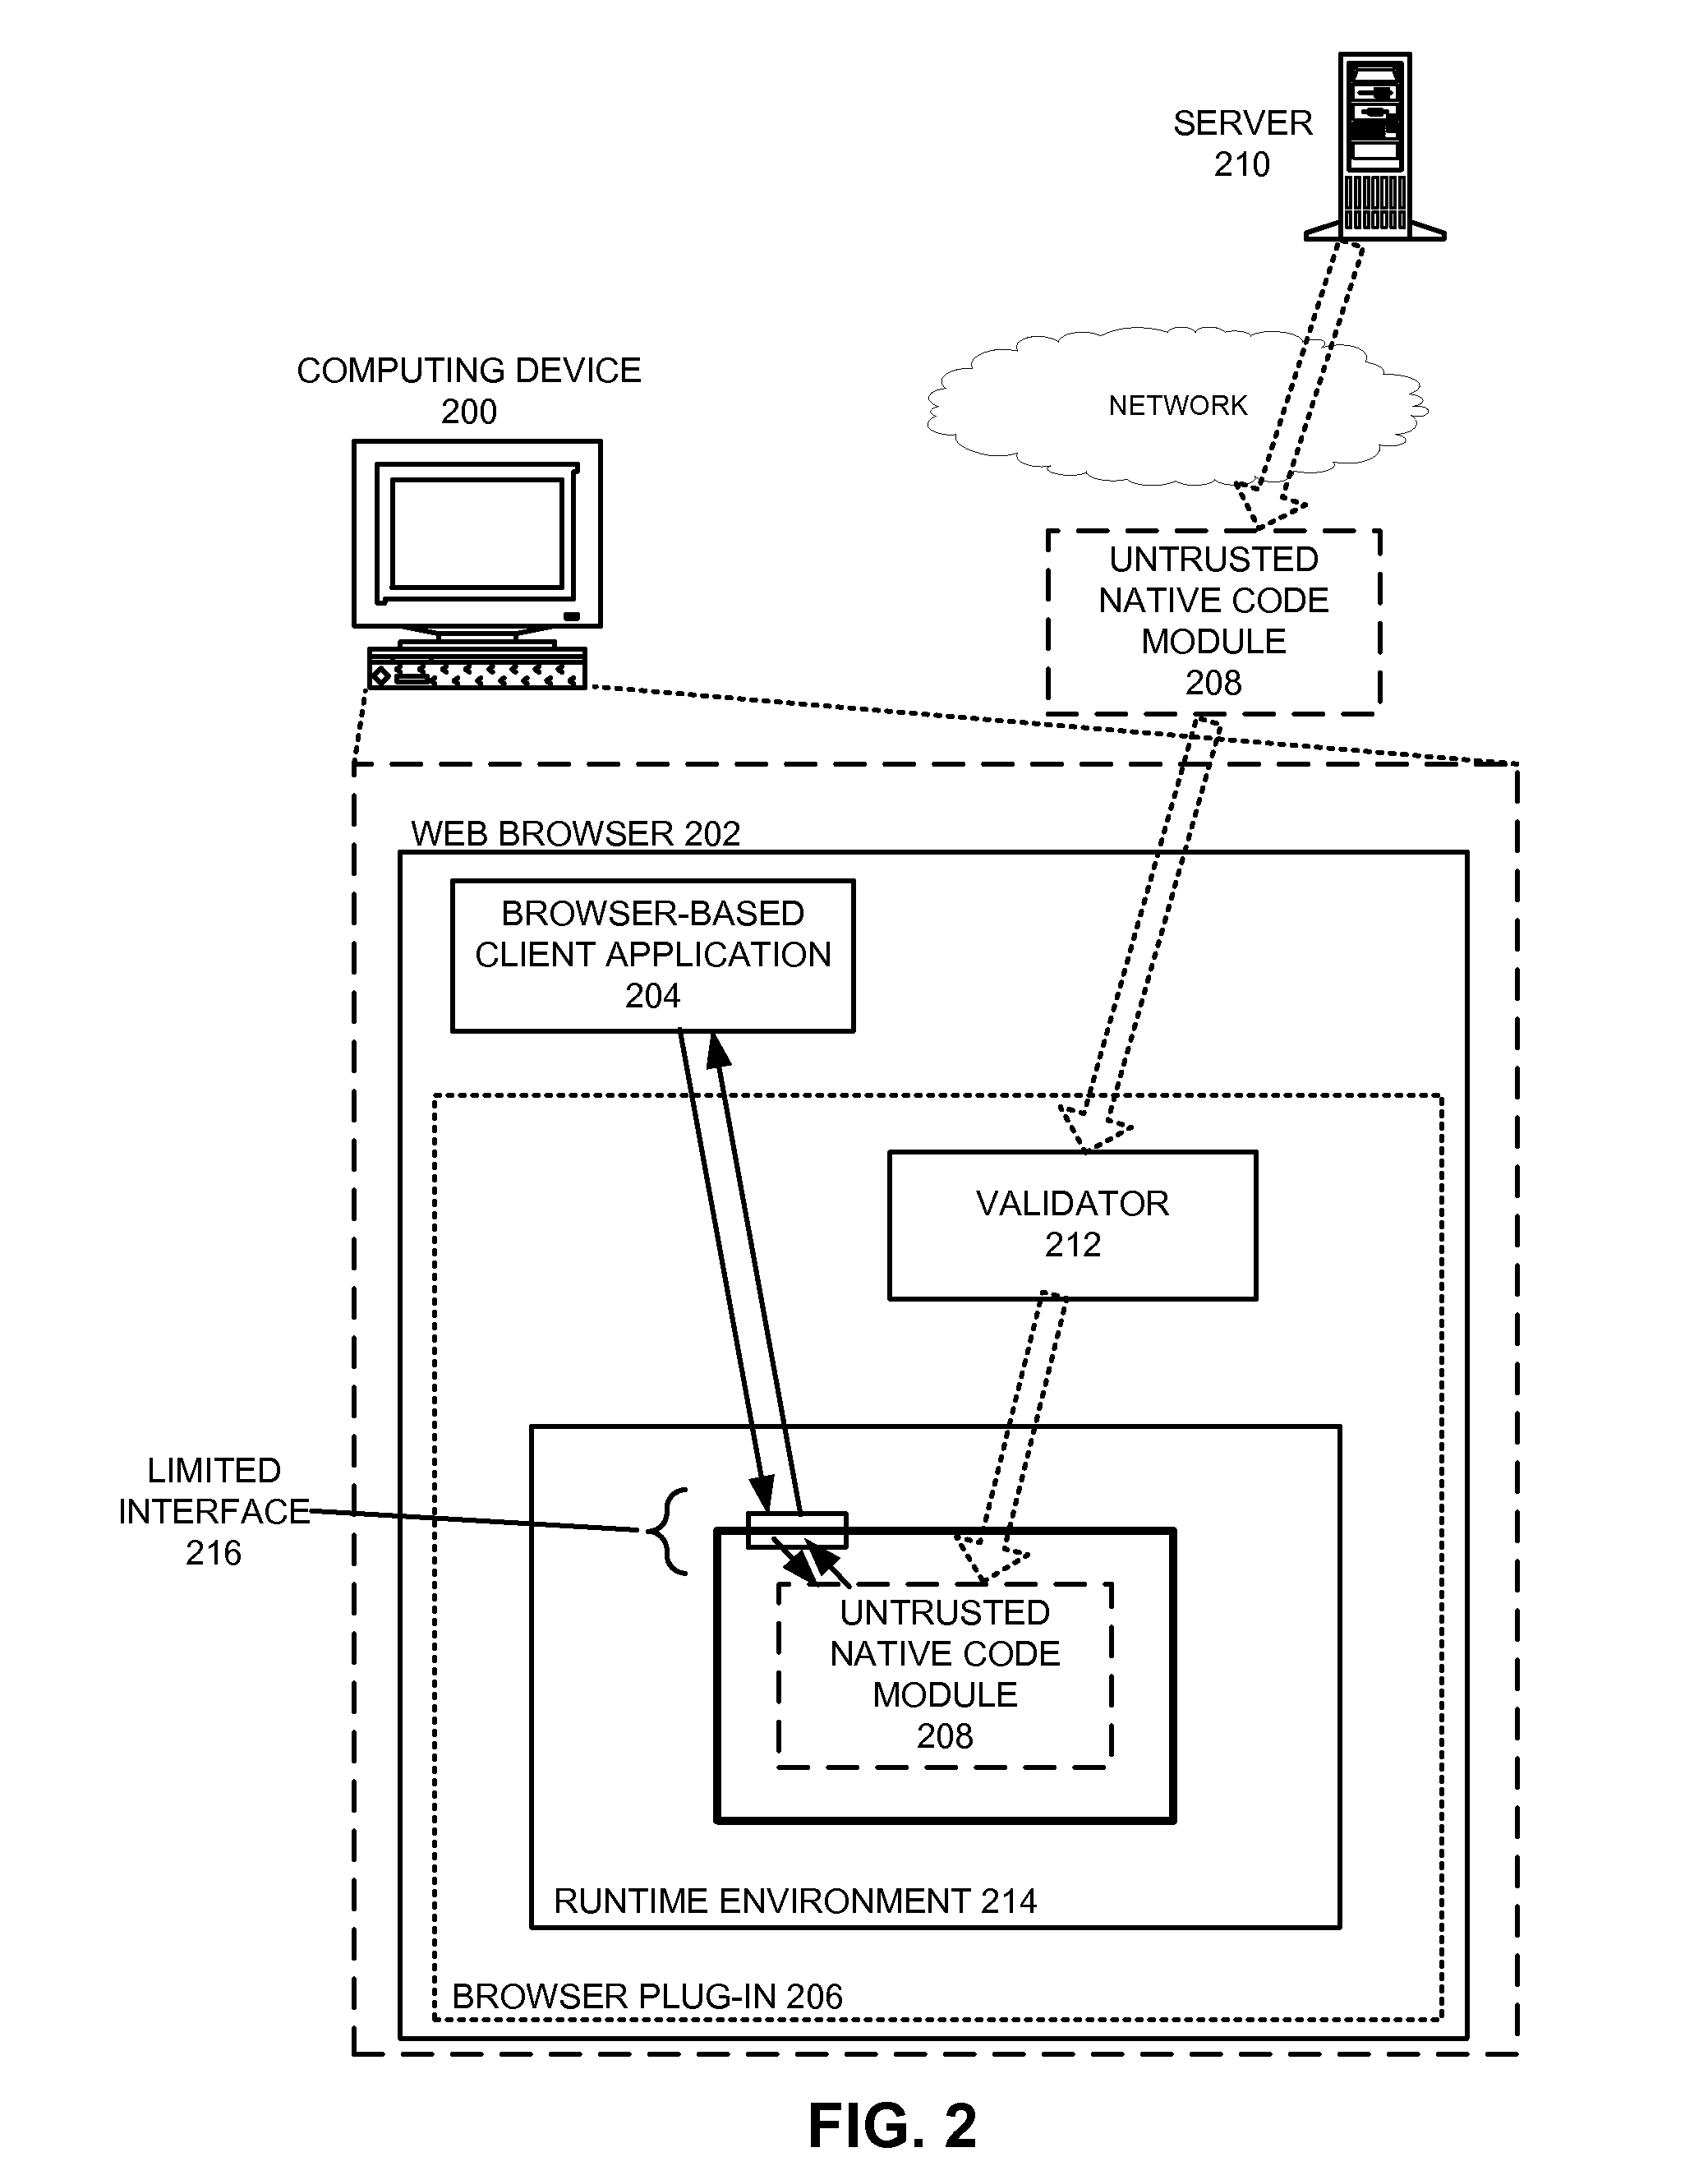 Method for Validating an Untrusted Native Code Module